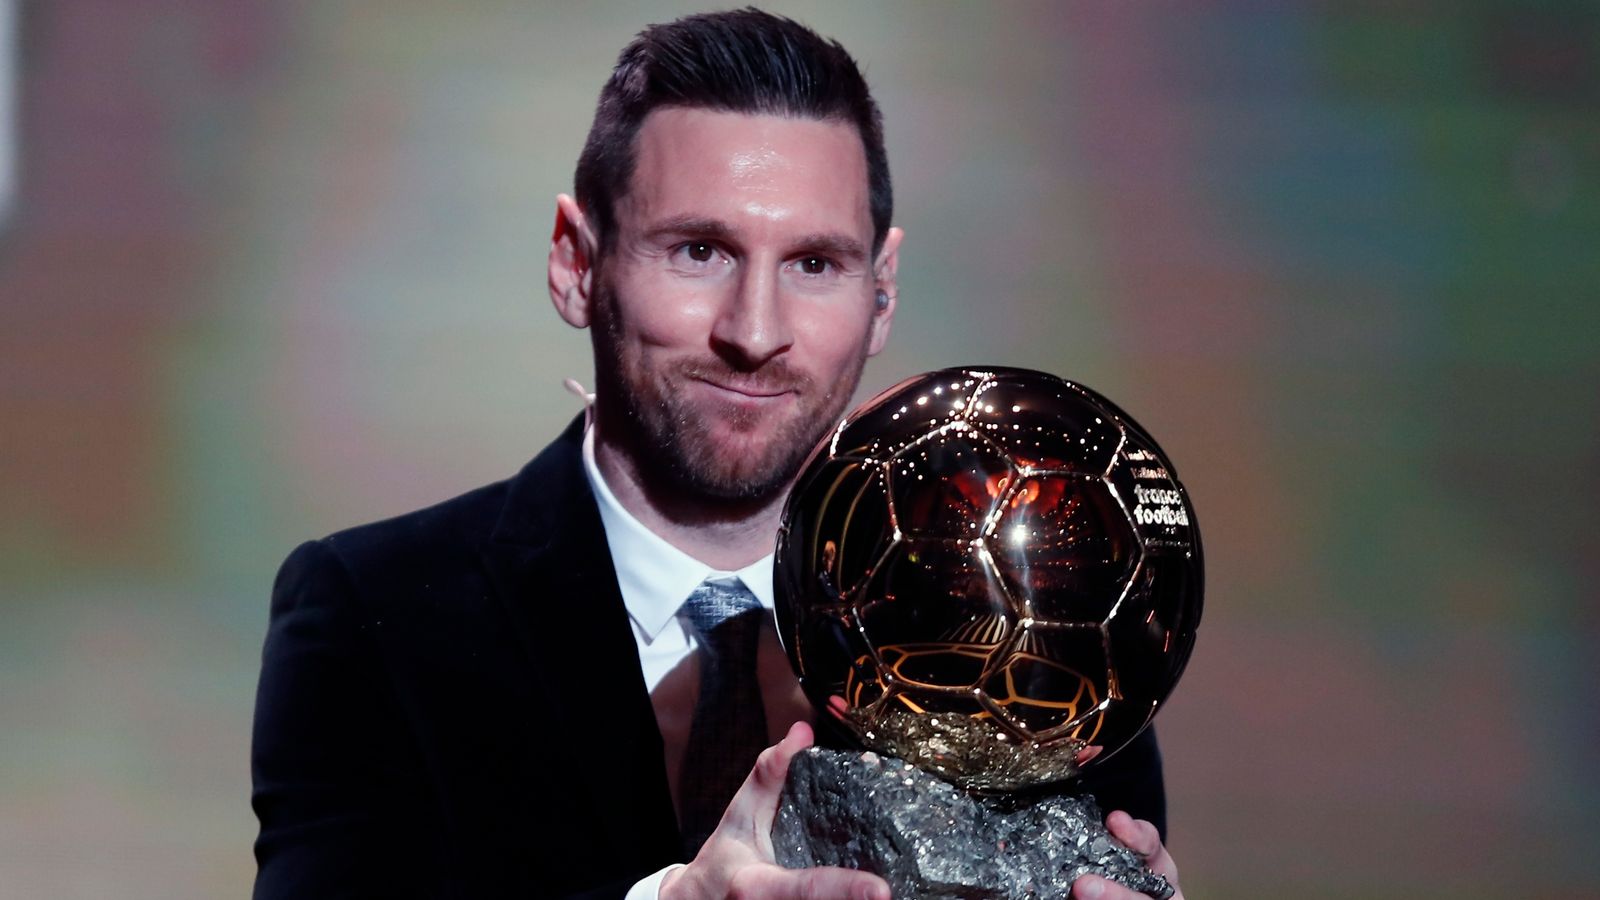 Lionel Messi will win the record seventh men's title for Ballon D'or 2021. He is one of the most recognized players in the world. Thus, he has a massive fan following worldwide. Also, he got popular in no time as he proved his skills to the world. Also, every news related to him circulates on all the social sites, globally and rapidly. Now he is to achieve another great title and his fans are loving it together with being very happy. Now let us see how things go.